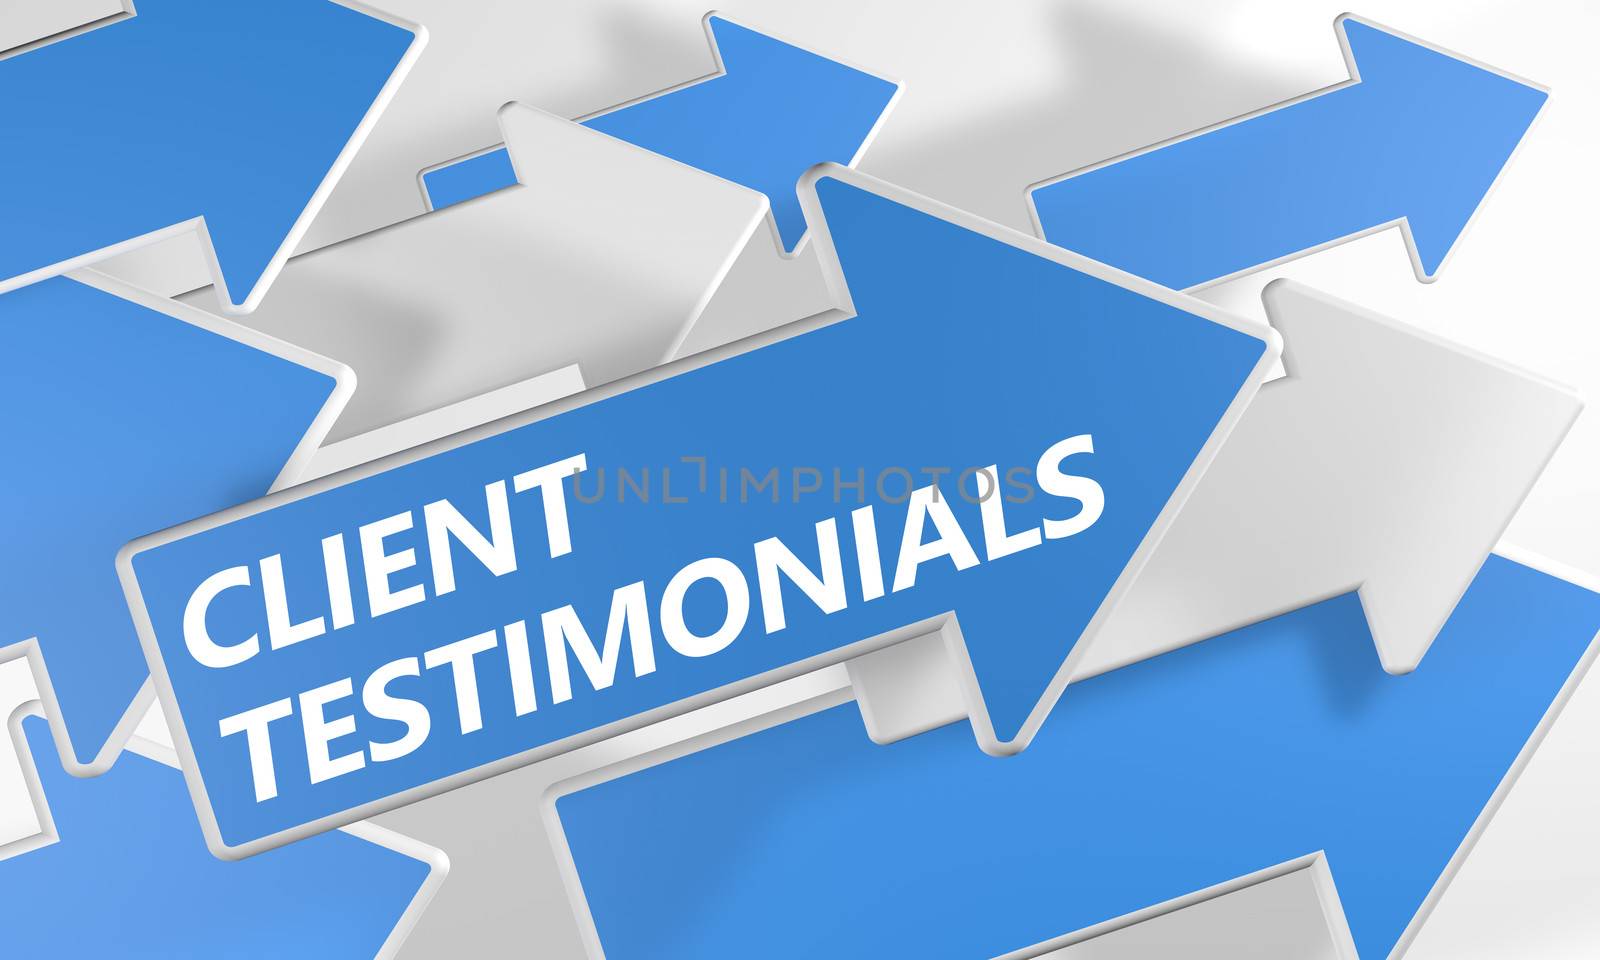 Client Testimonials 3d render concept with blue and white arrows flying over a white background.